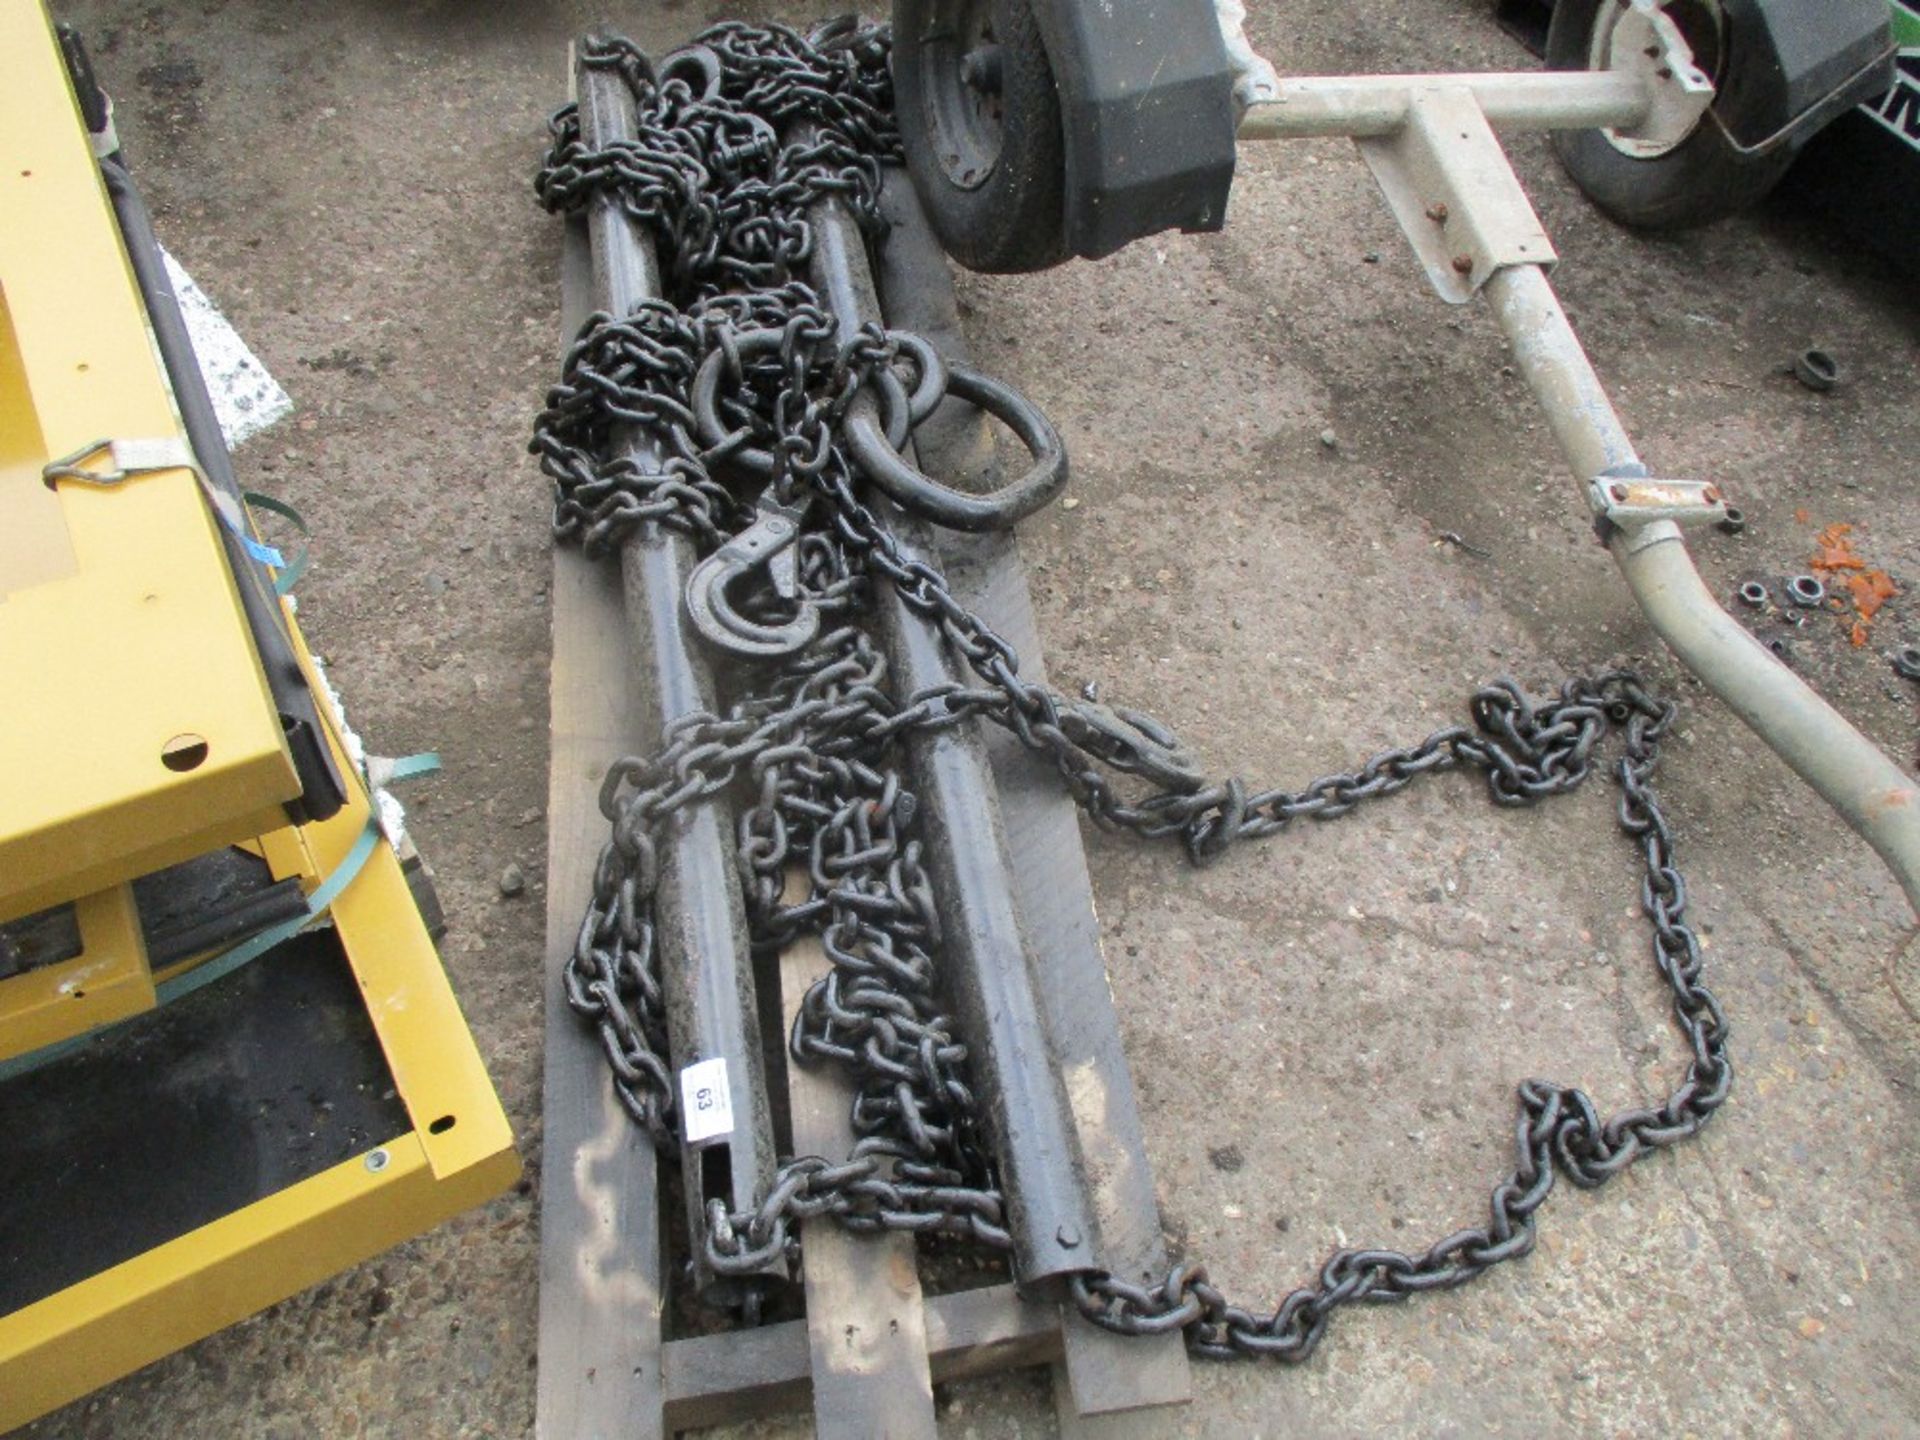 PALLET OF 4 LEG CHAIN SYSTEM, 11.2 TONNE RATED, 22FT LENGTH 13MM CHAINS, SPREADER BARS AND SELF LOCK